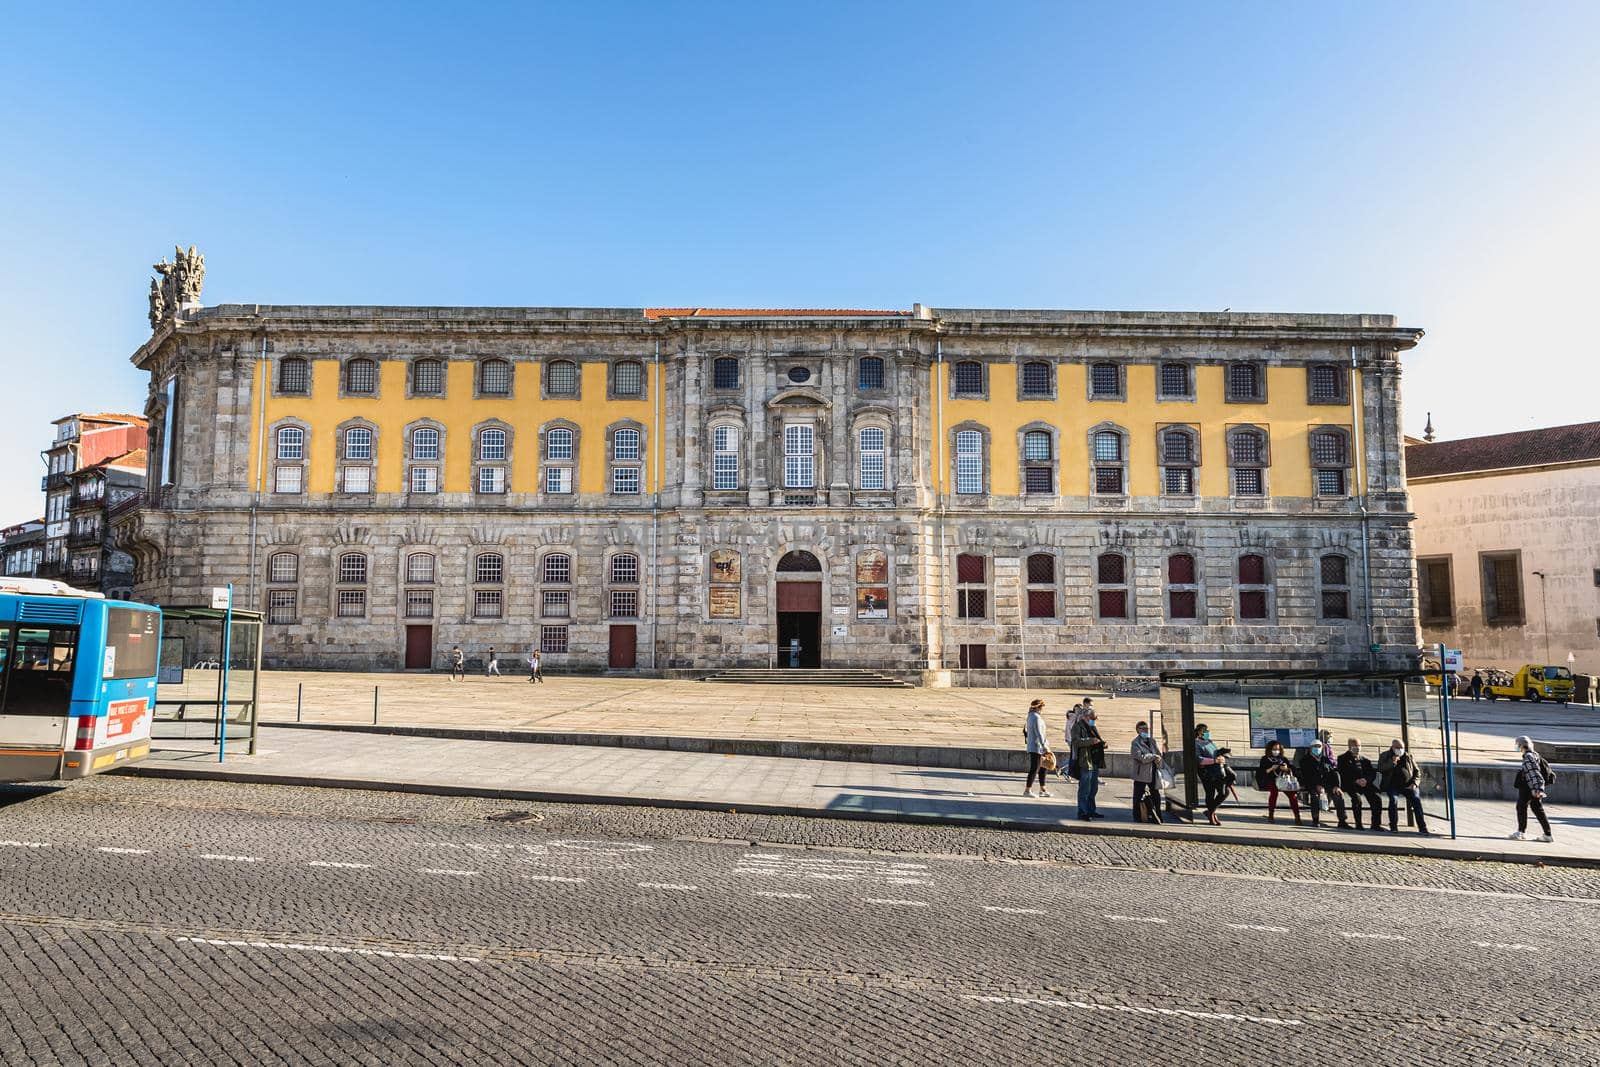 Porto, Portugal - October 23, 2020: Facade of the Portuguese Electricity and Photography Museum in the historic city center on a fall day